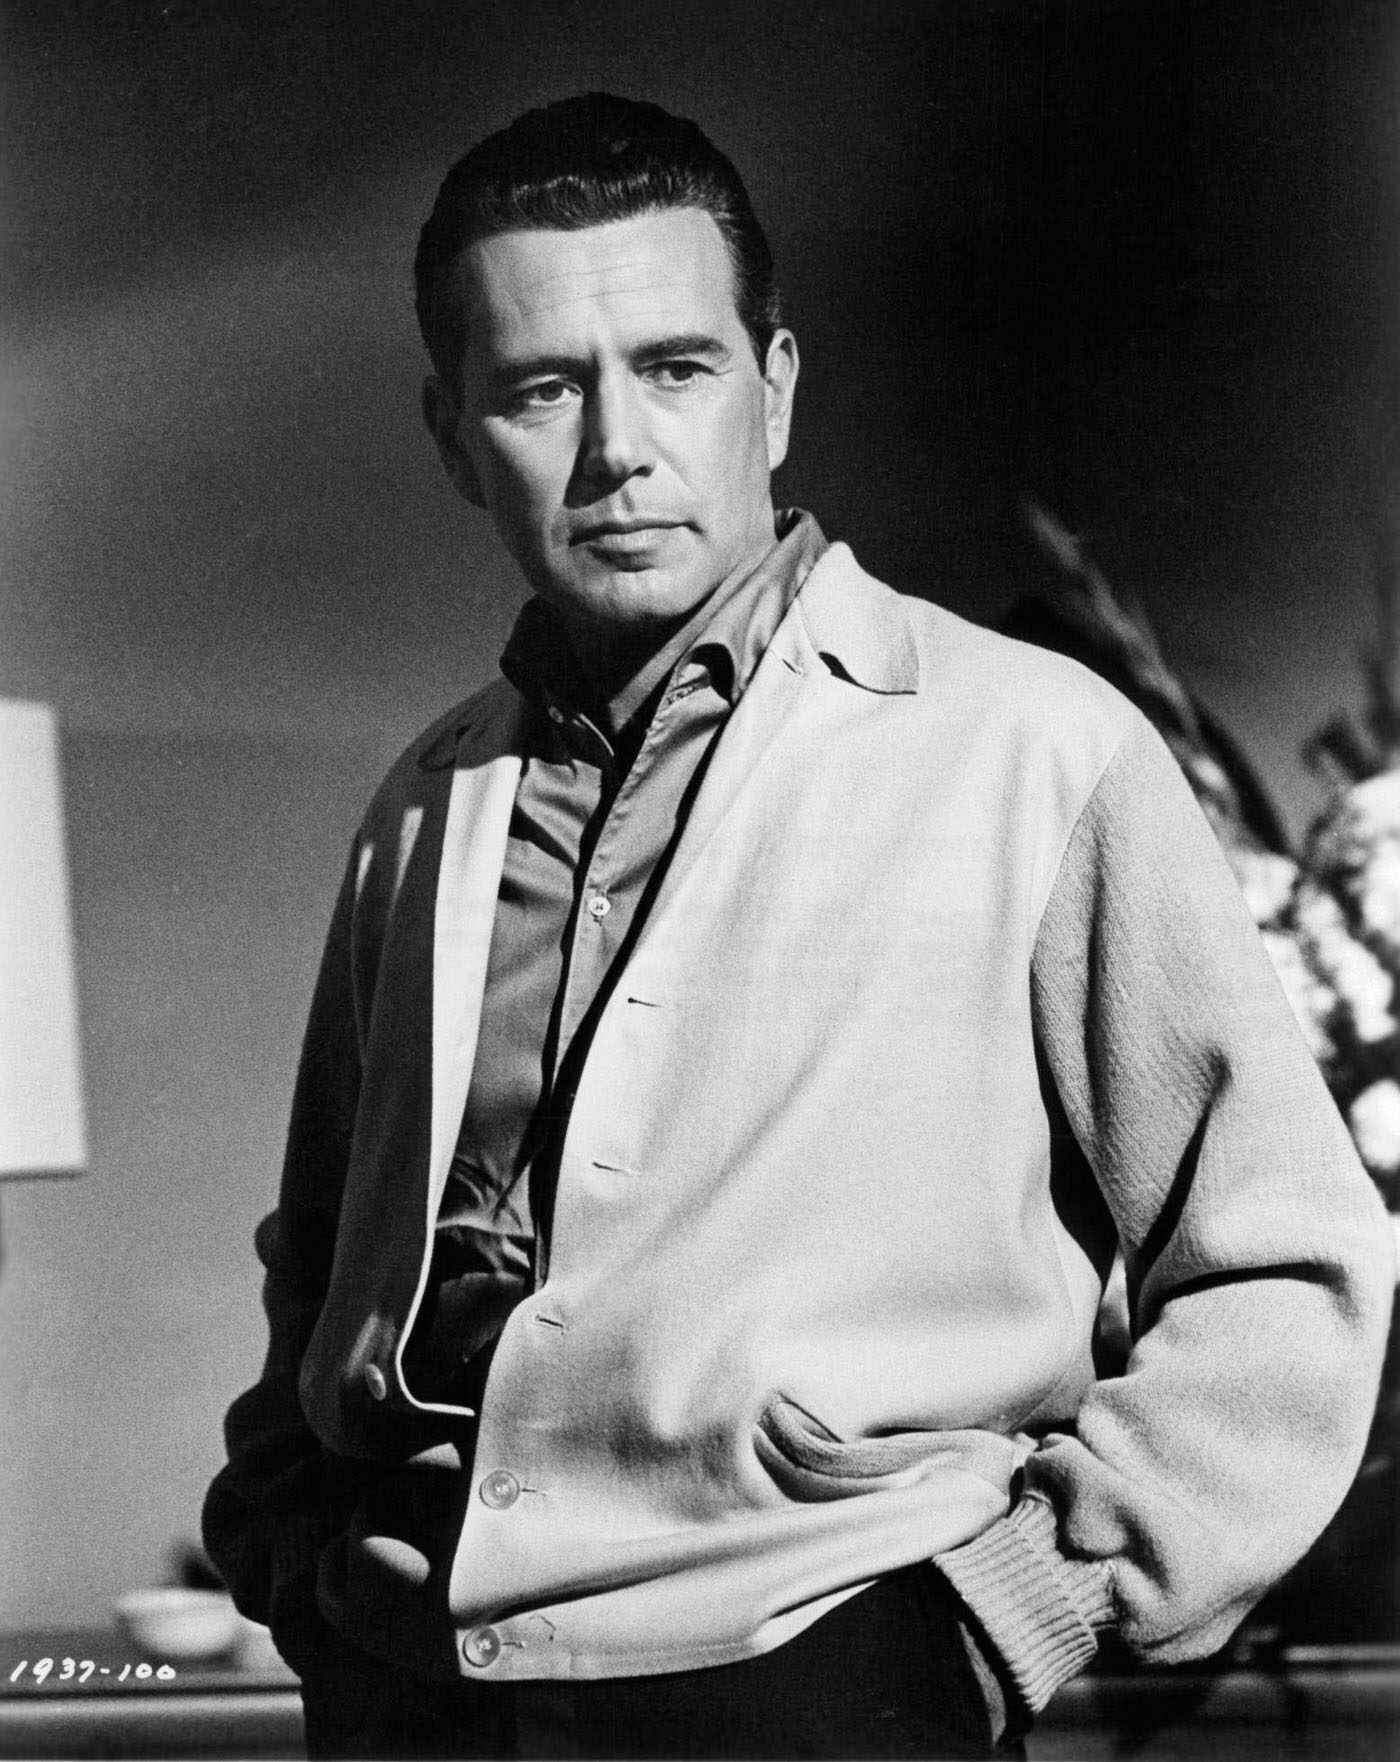 John Forsythe with his hands in his pockets in a scene from the film 'Kitten With A Whip', 1964.